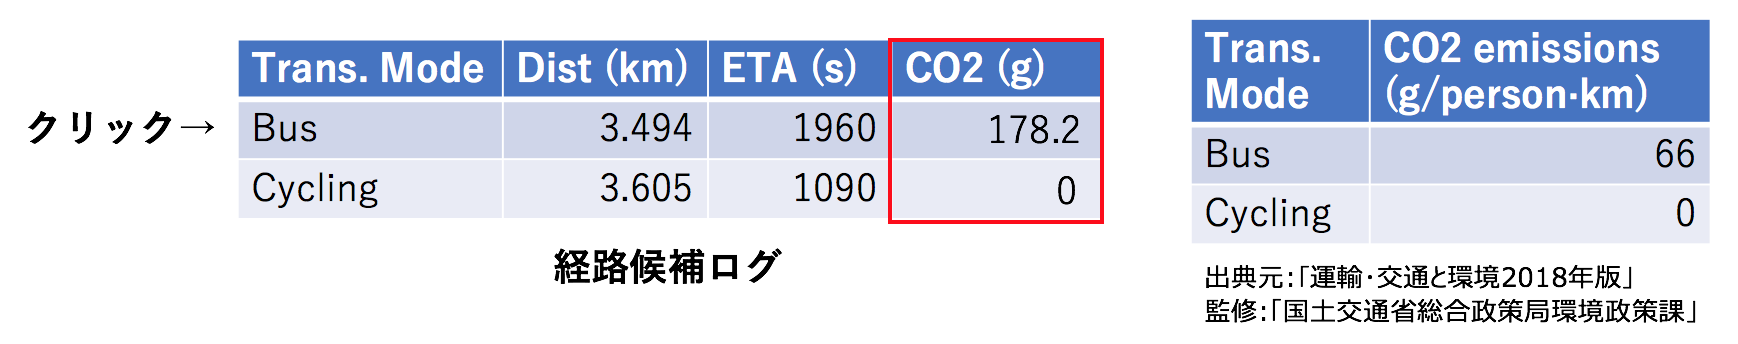 CO2_calc.png